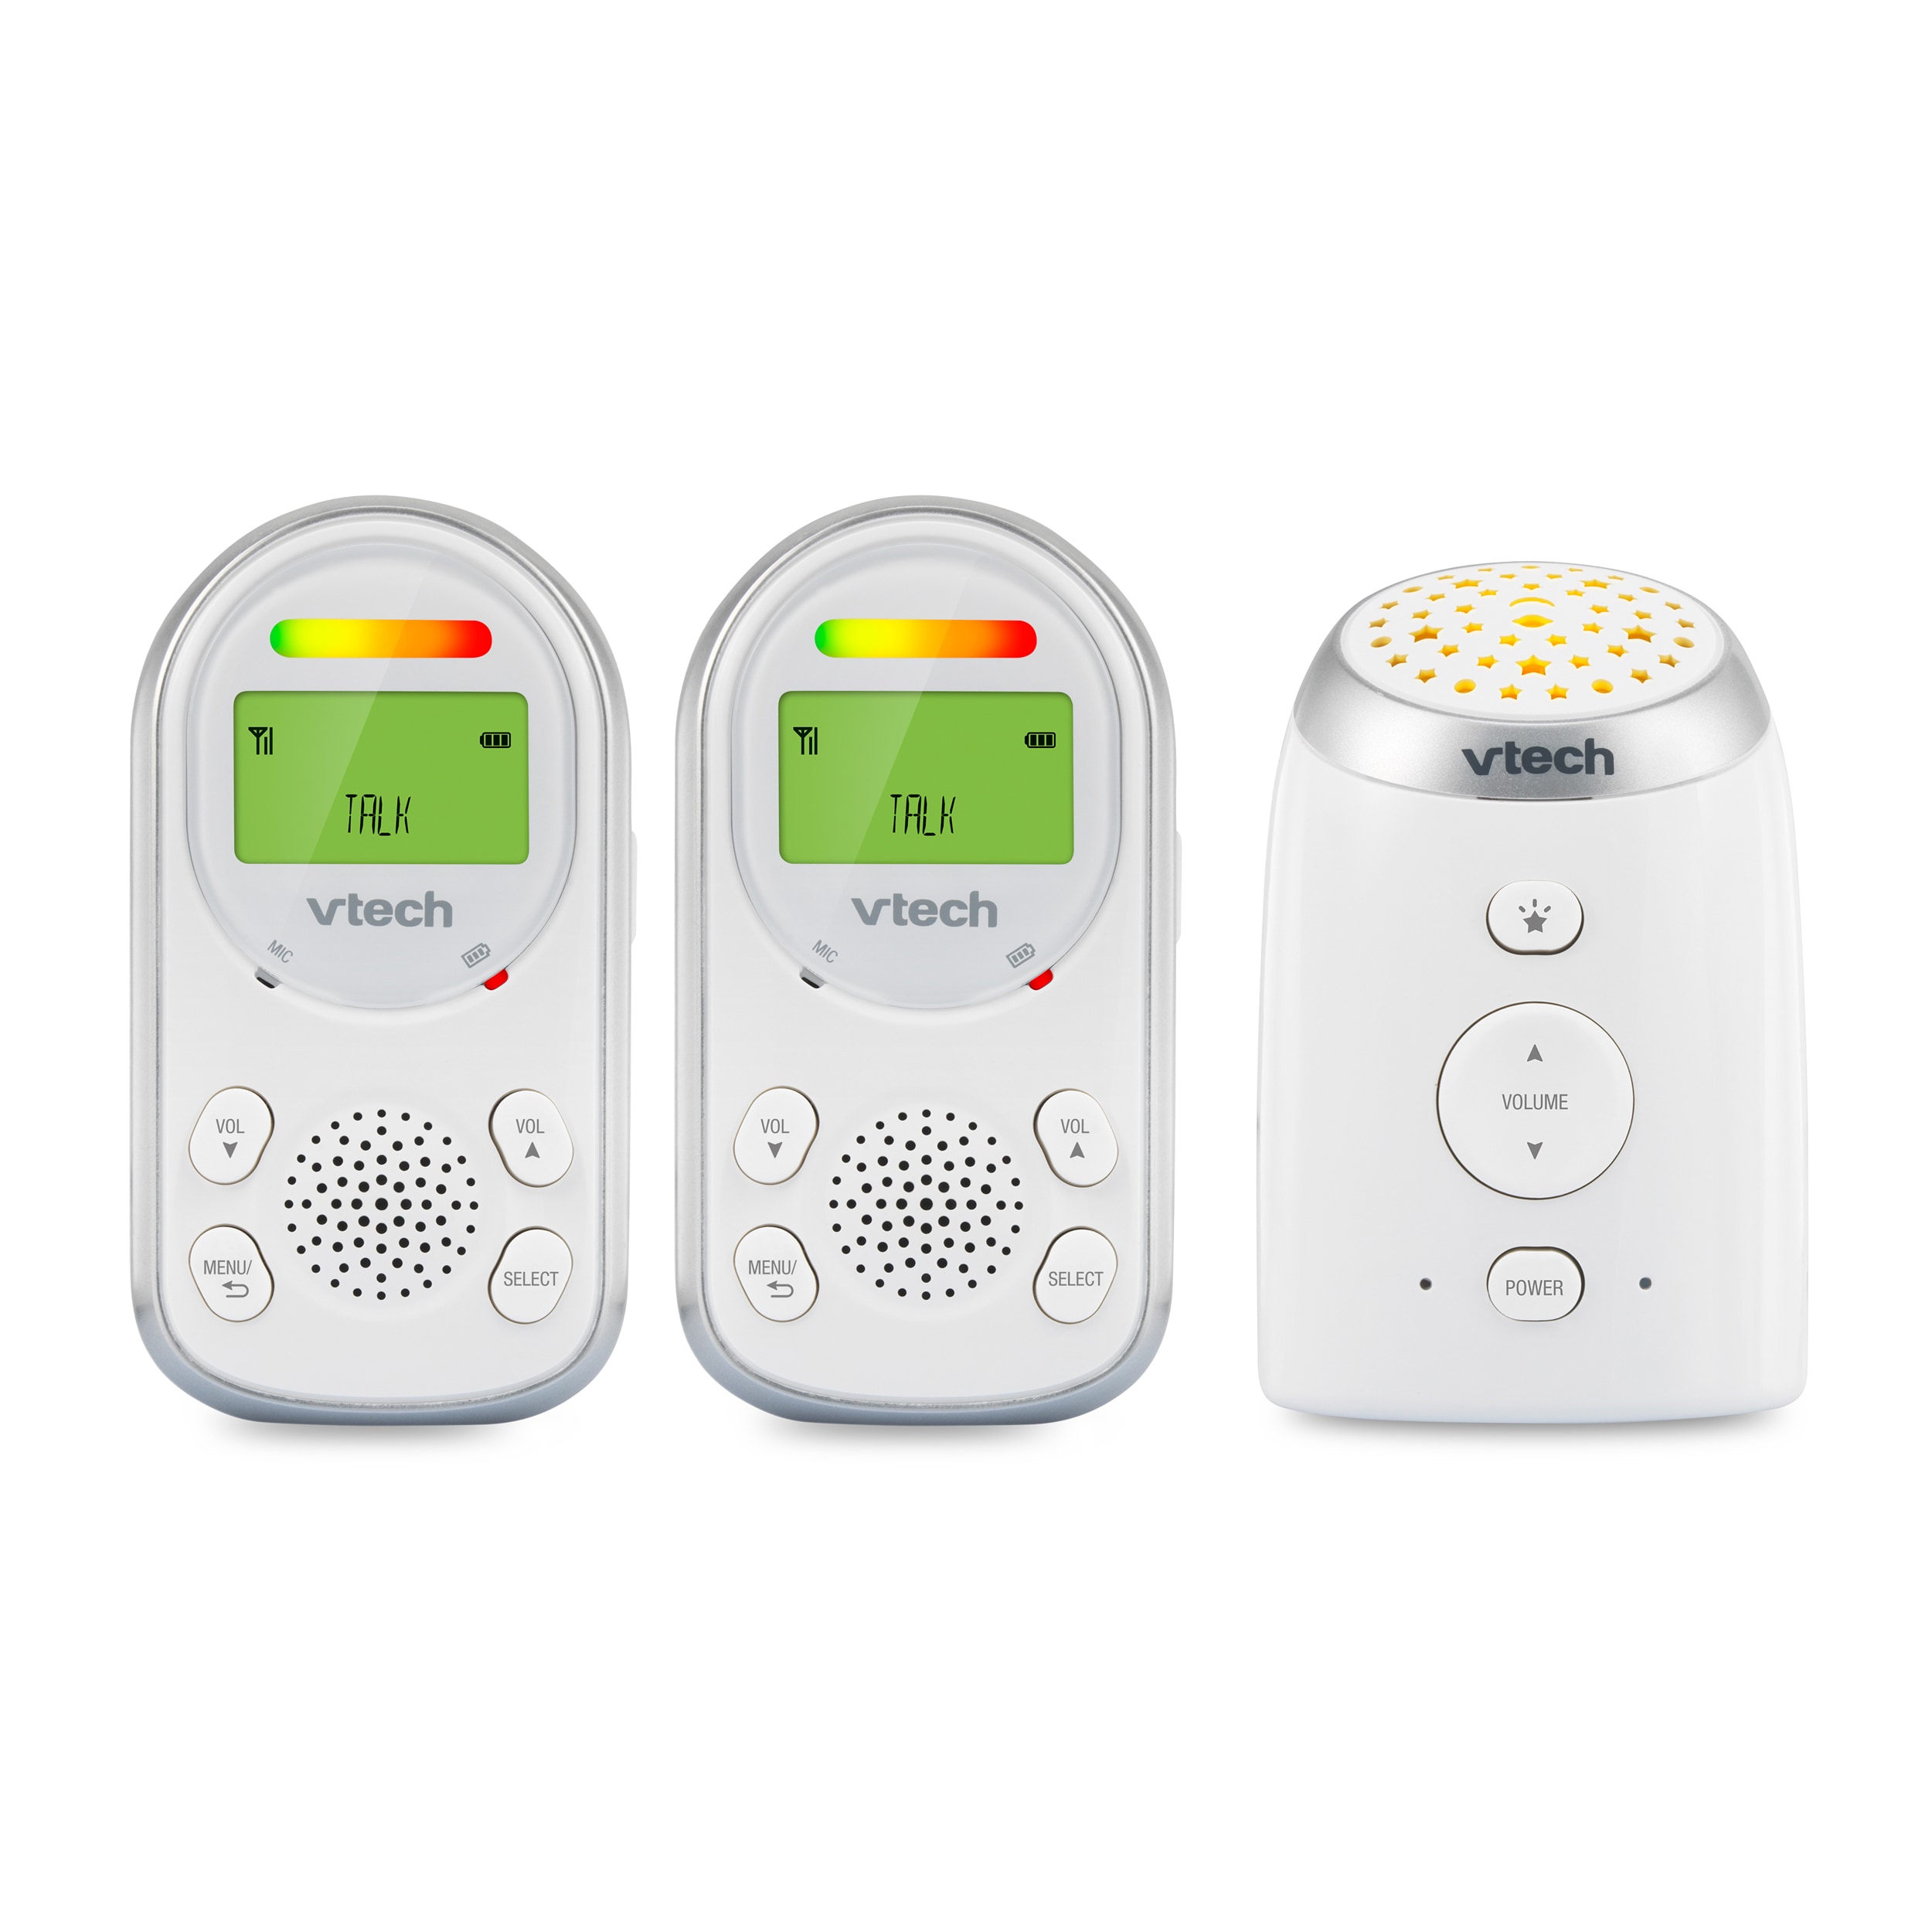 VTech TM8212-2 Audio Baby Monitor with 2 Parent Units, up to 1,000